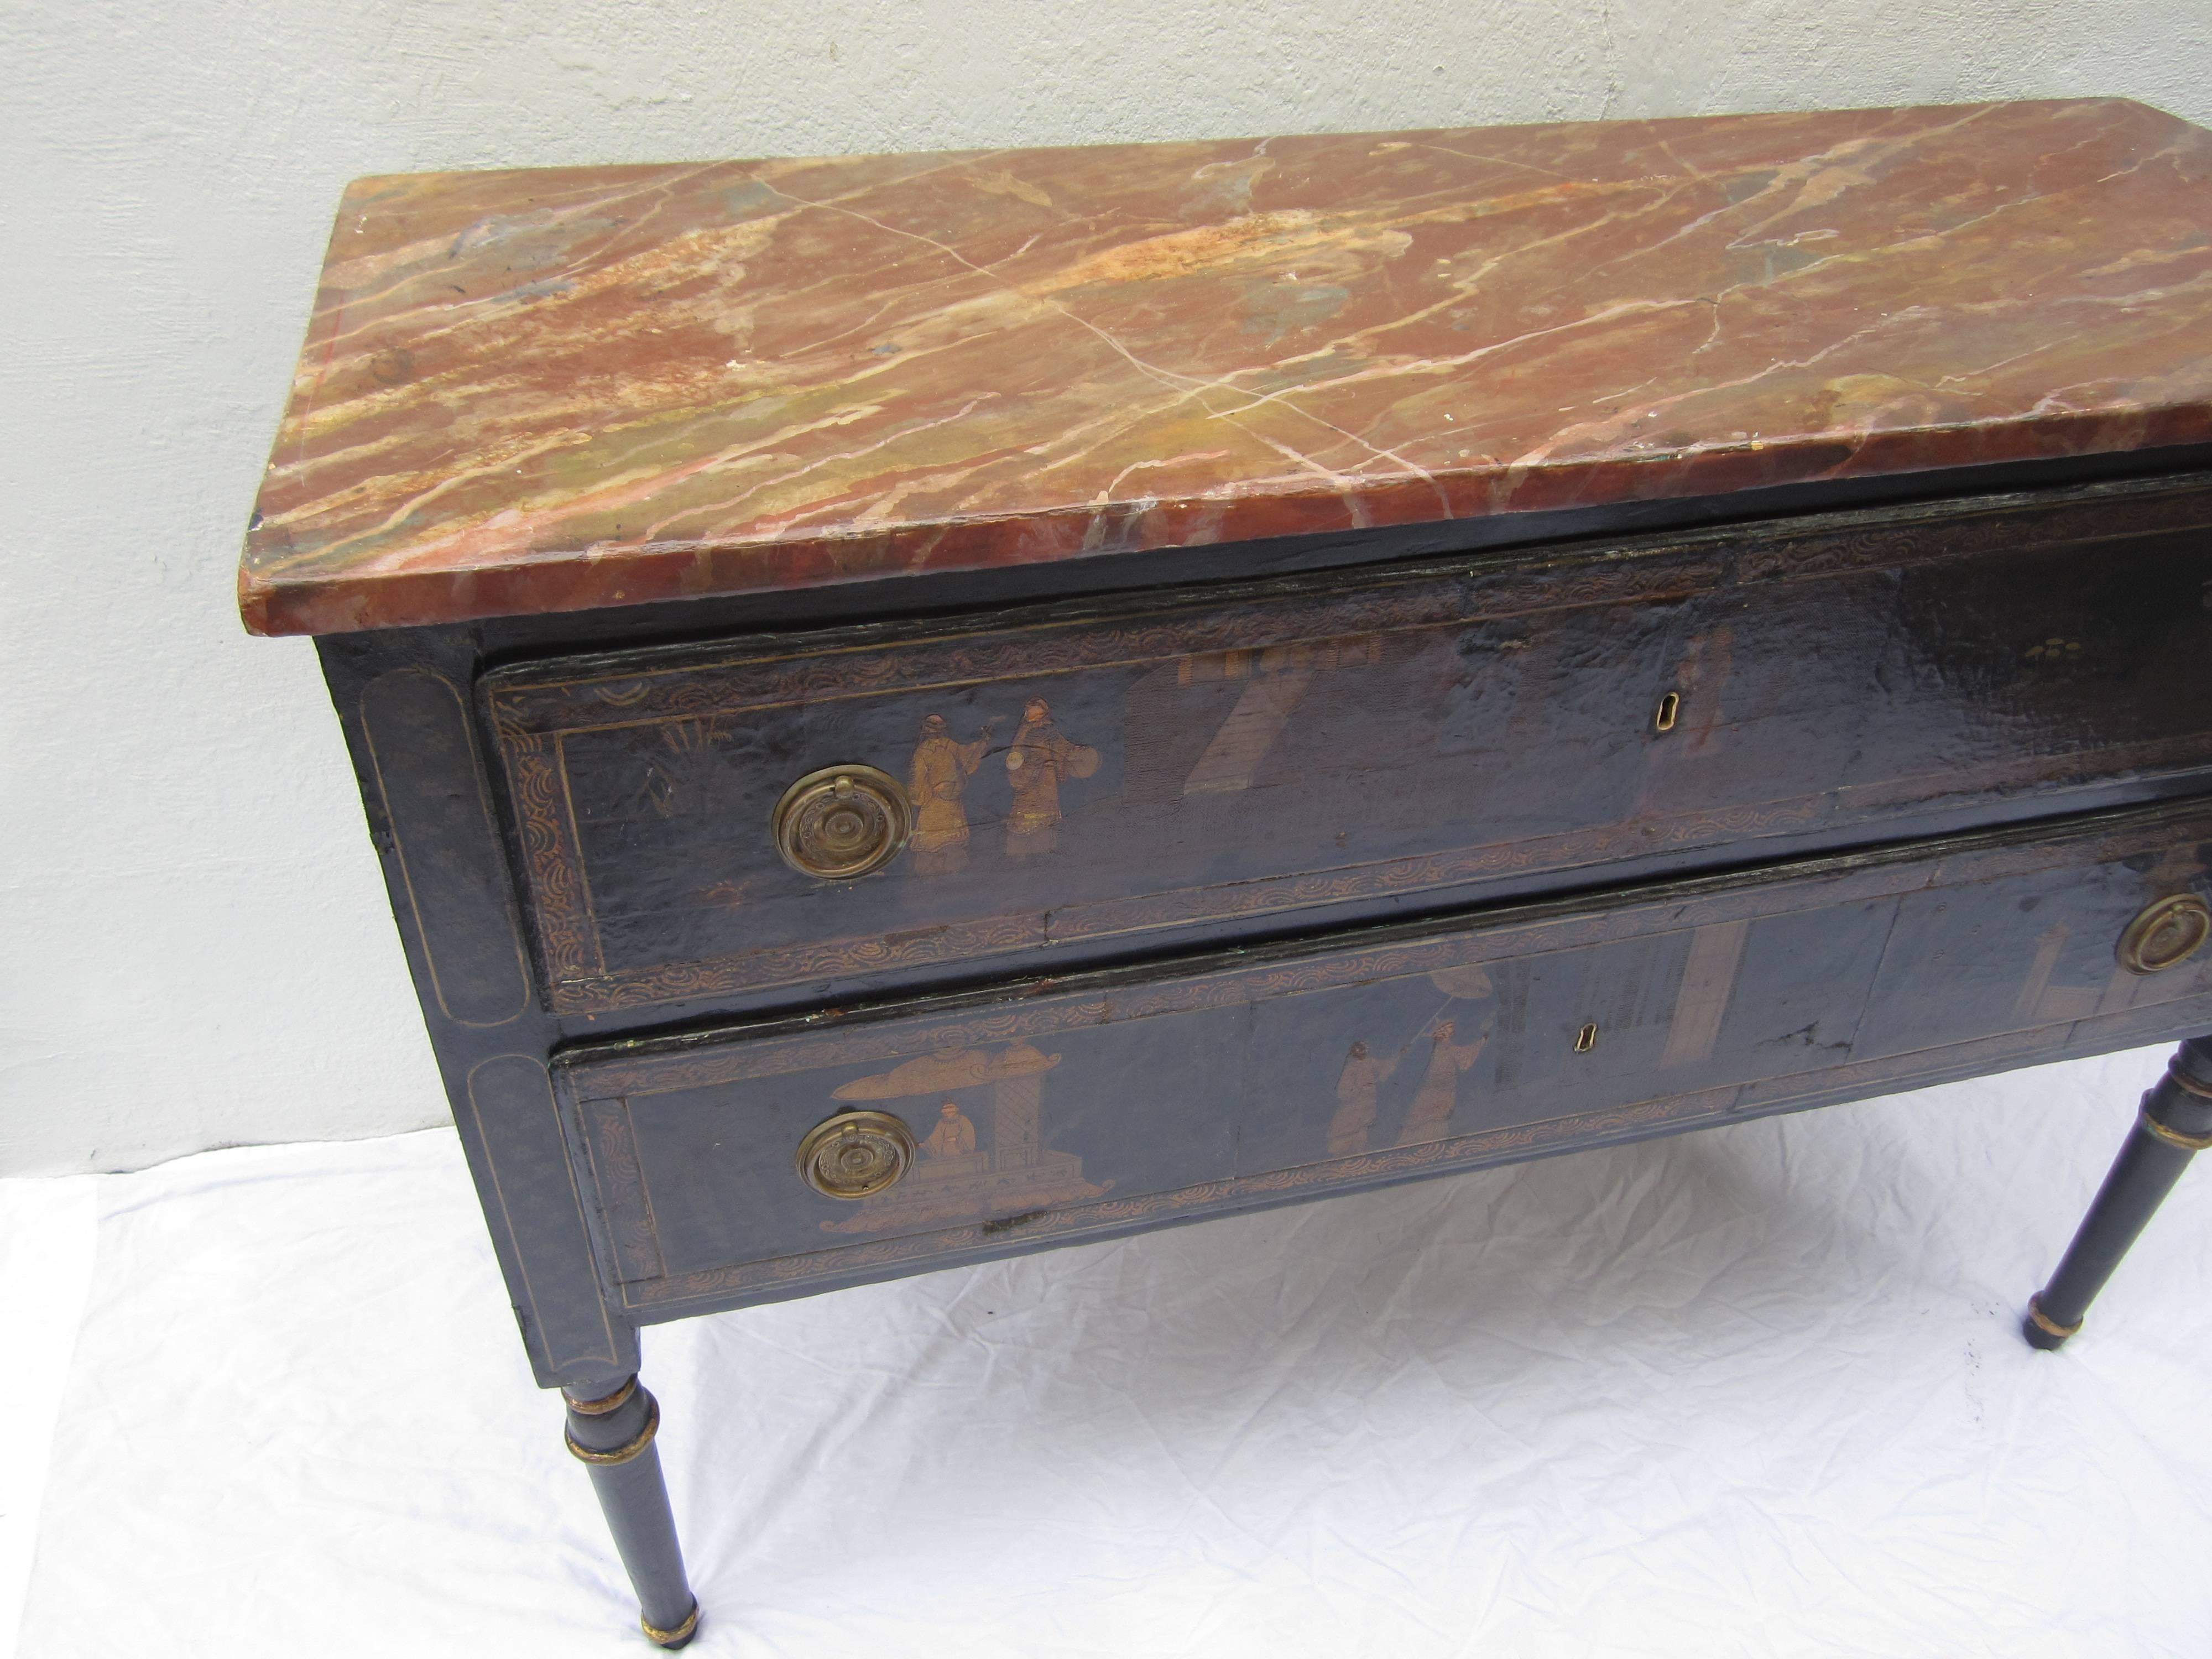 Fabulous 18th century chinoiserie commode with faux marble top with two drawers. It has some restoration work.